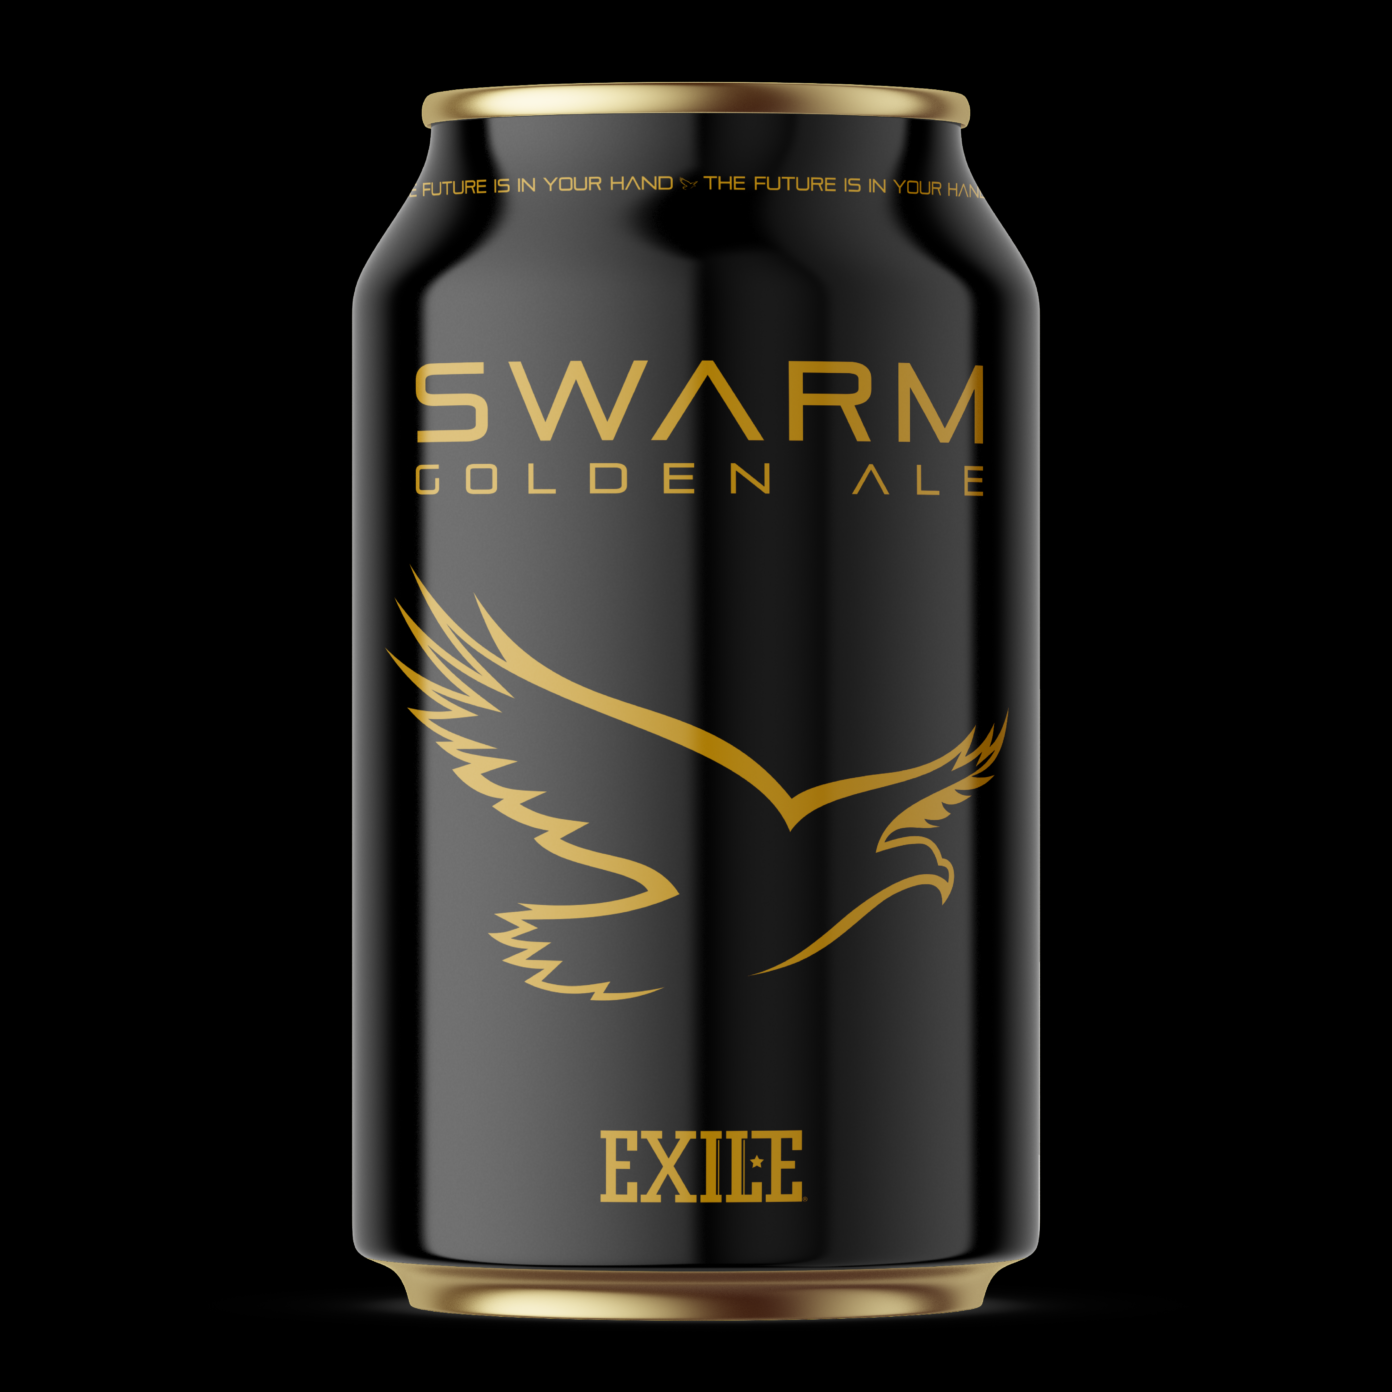 Swarm-Exile-golden-ale-can-1392x1392.png